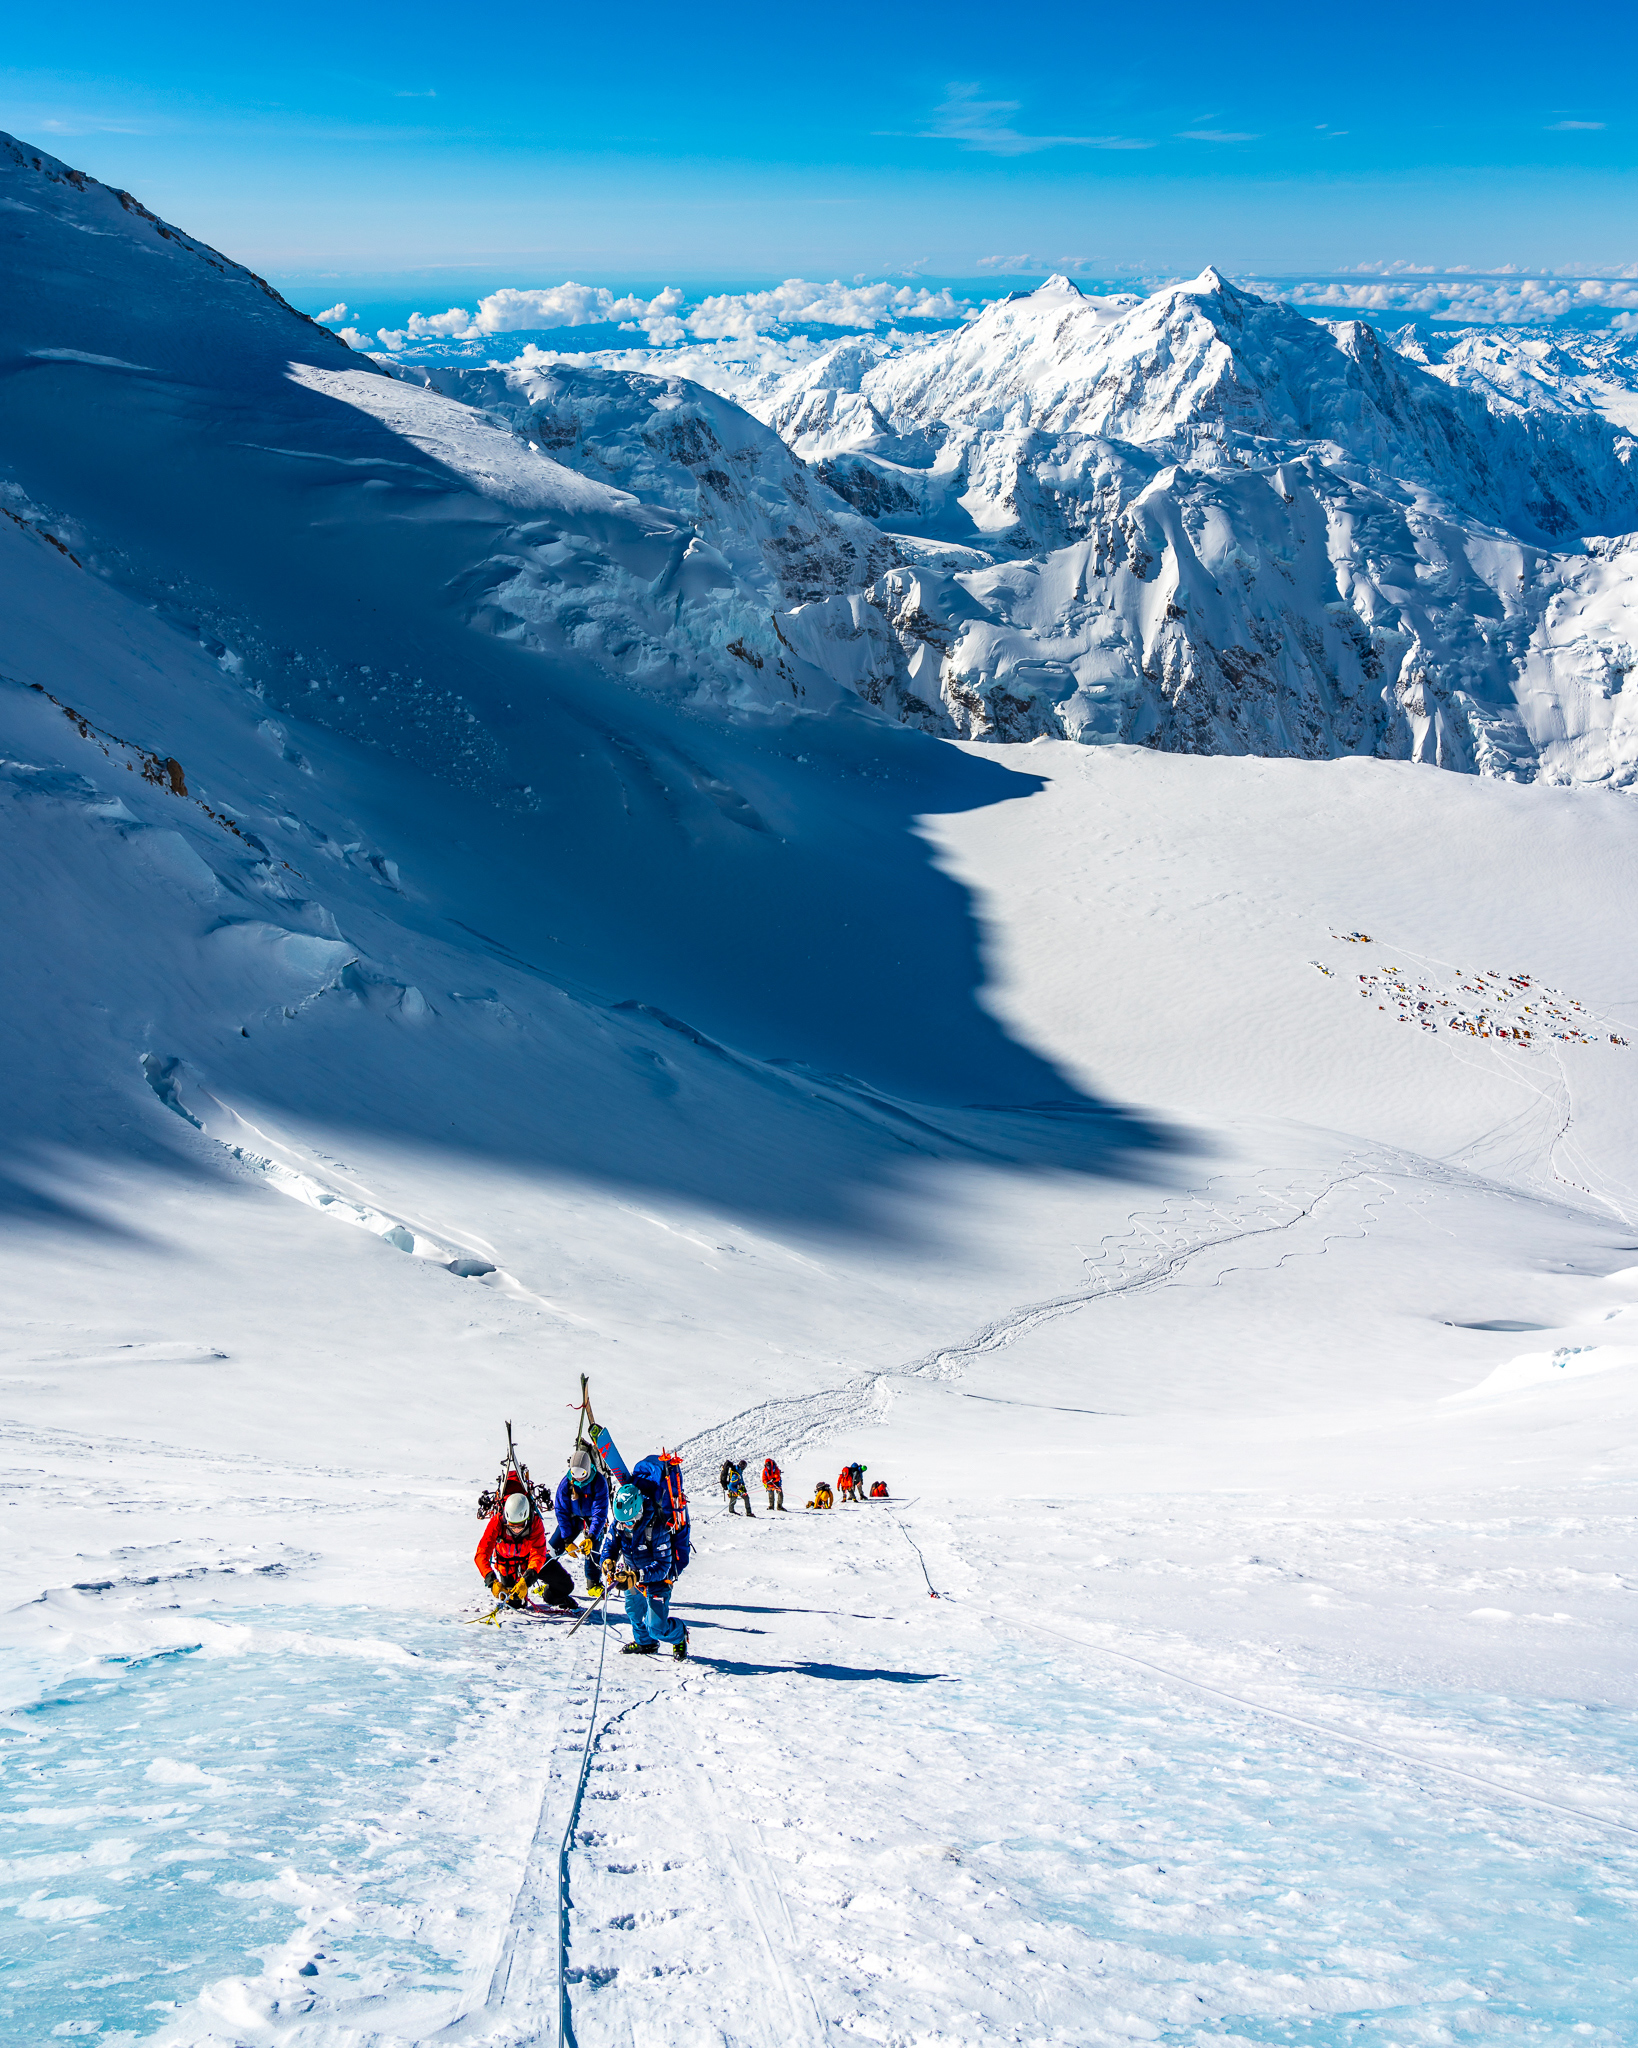 The group ascending some icy terrain